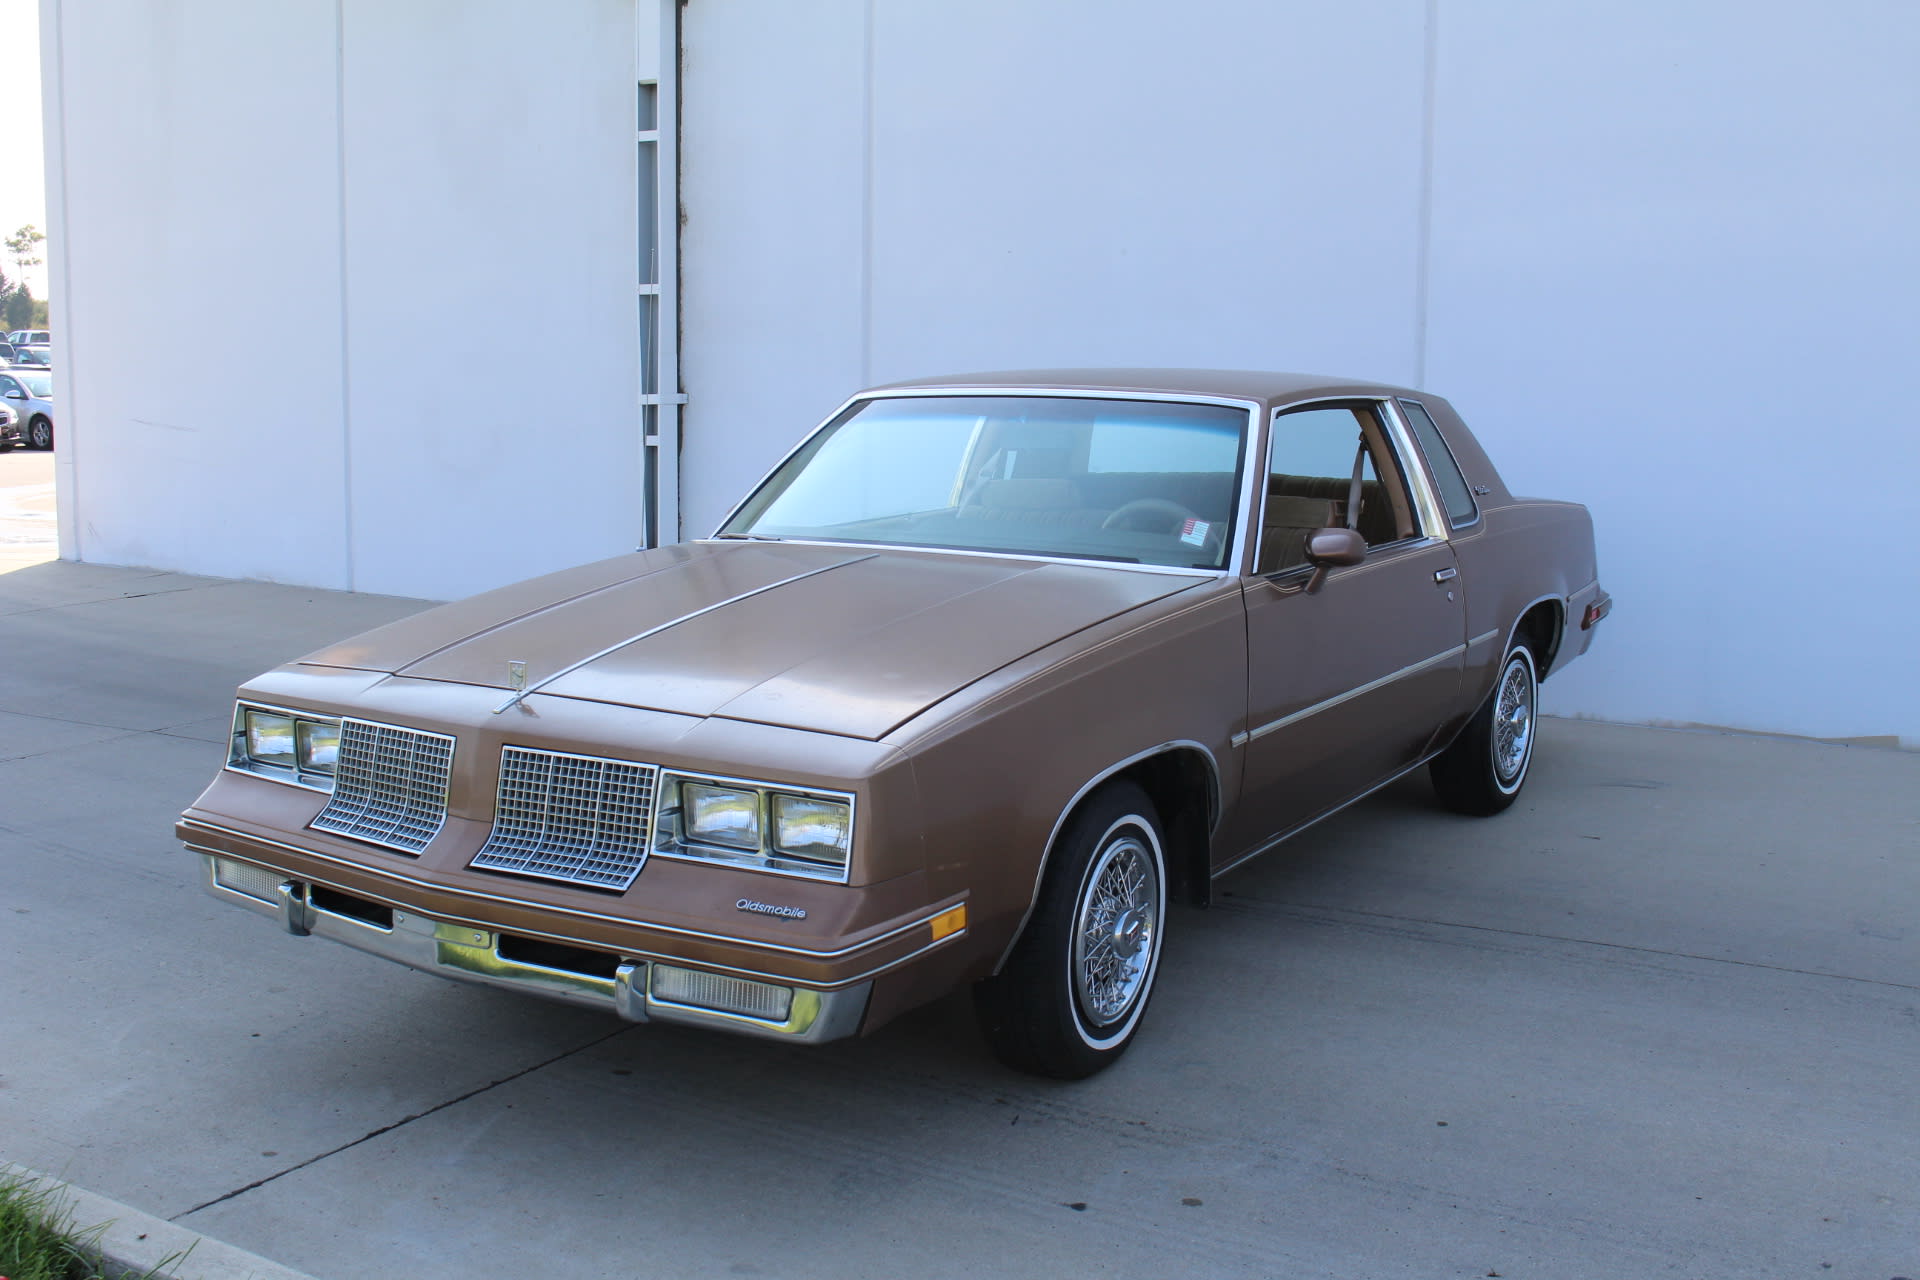 1985 Oldsmobile Cutlass Supreme at Chicago 2014 asS15 - Mecum Auctions